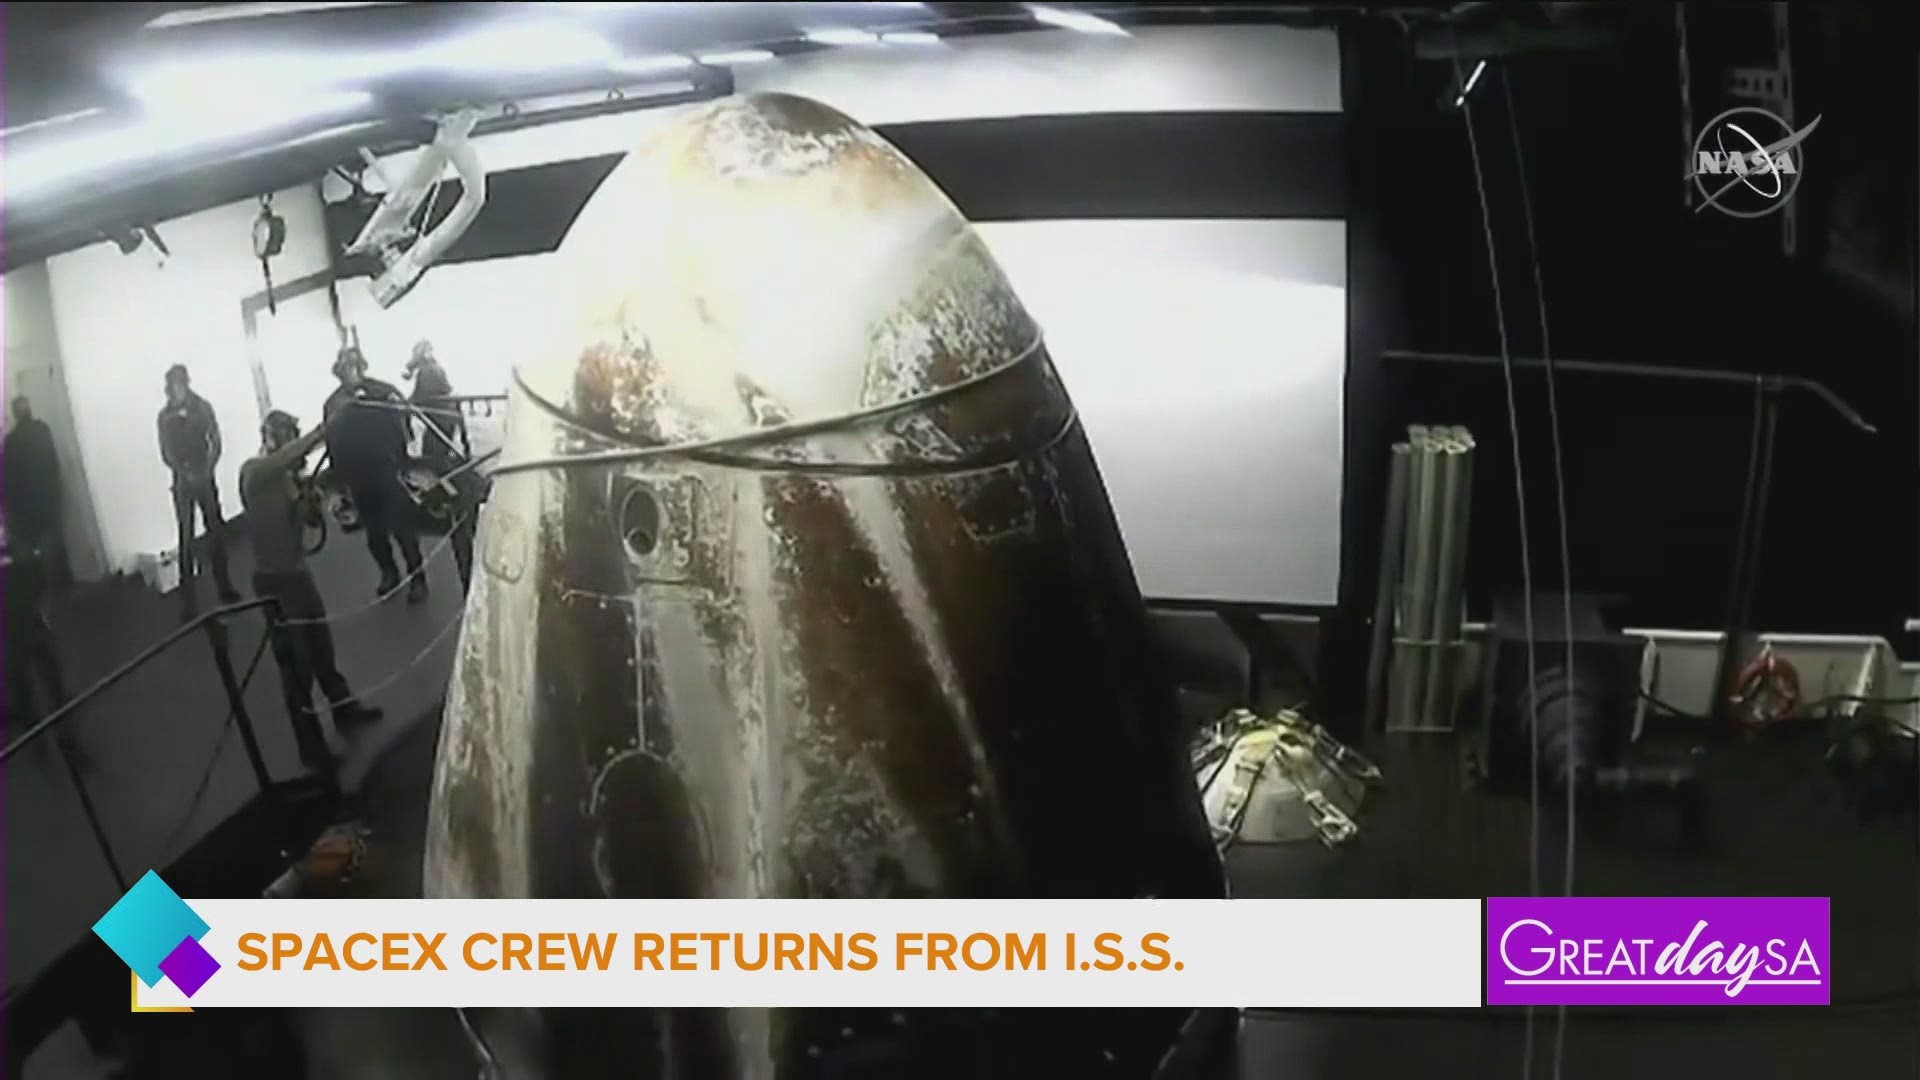 The SpaceX crew returns!